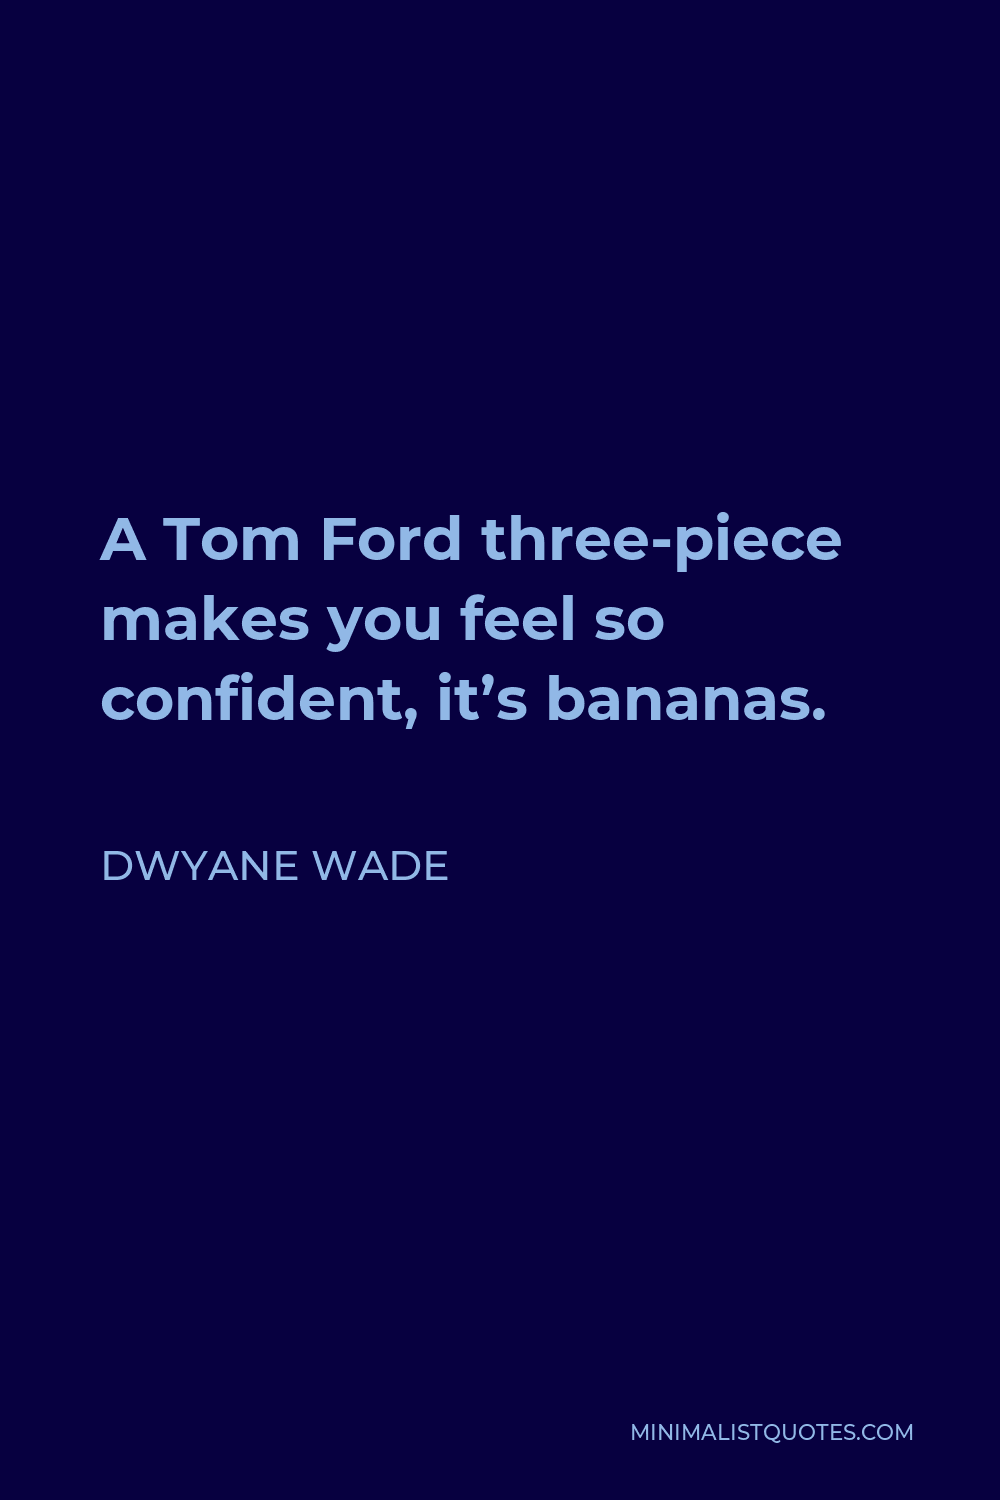 Dwyane Wade Quote - A Tom Ford three-piece makes you feel so confident, it’s bananas.